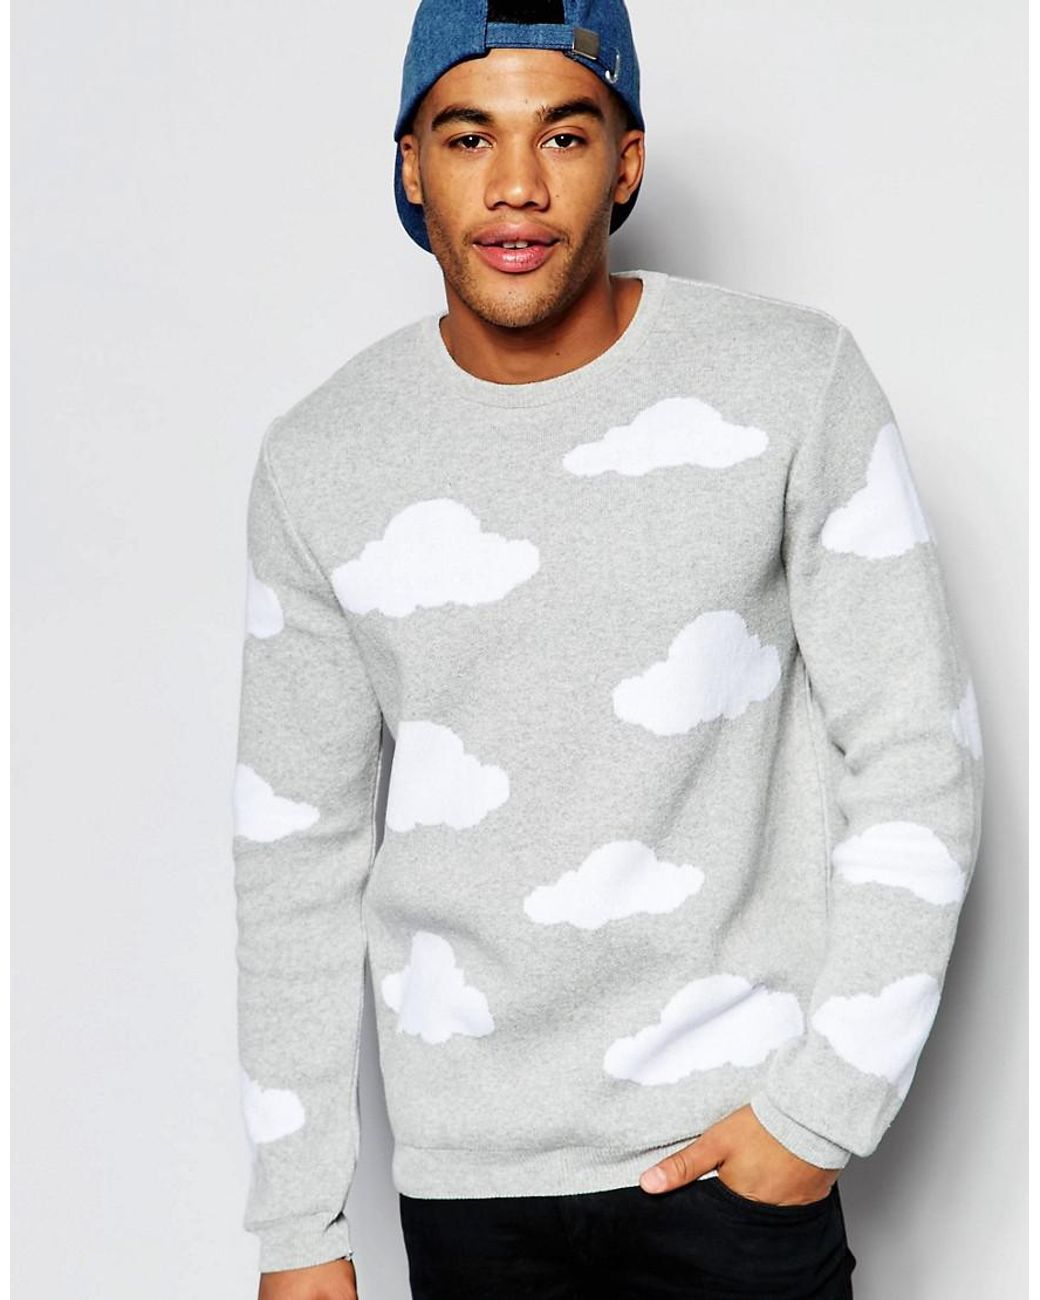 ASOS Sweater With Clouds Design in Gray for Men